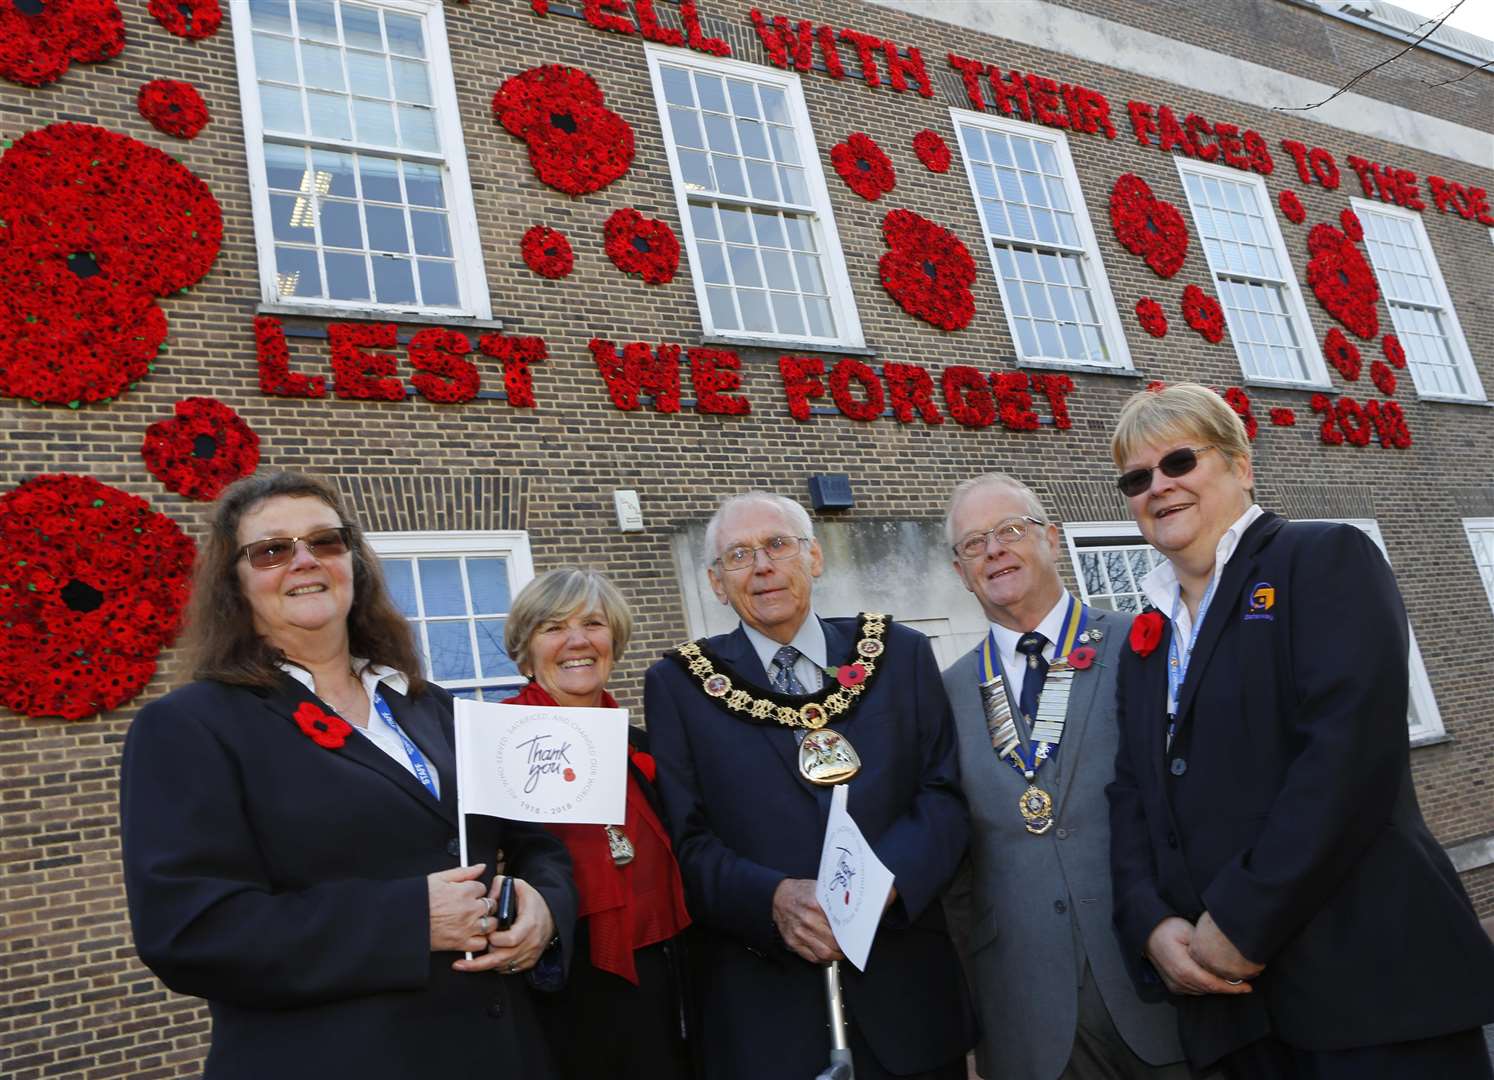 RBL unveil installation of a display of poppies to commemorate 100 years since end of the First World War at Tunbridge Wells Town Hall Picture: Andy Jones